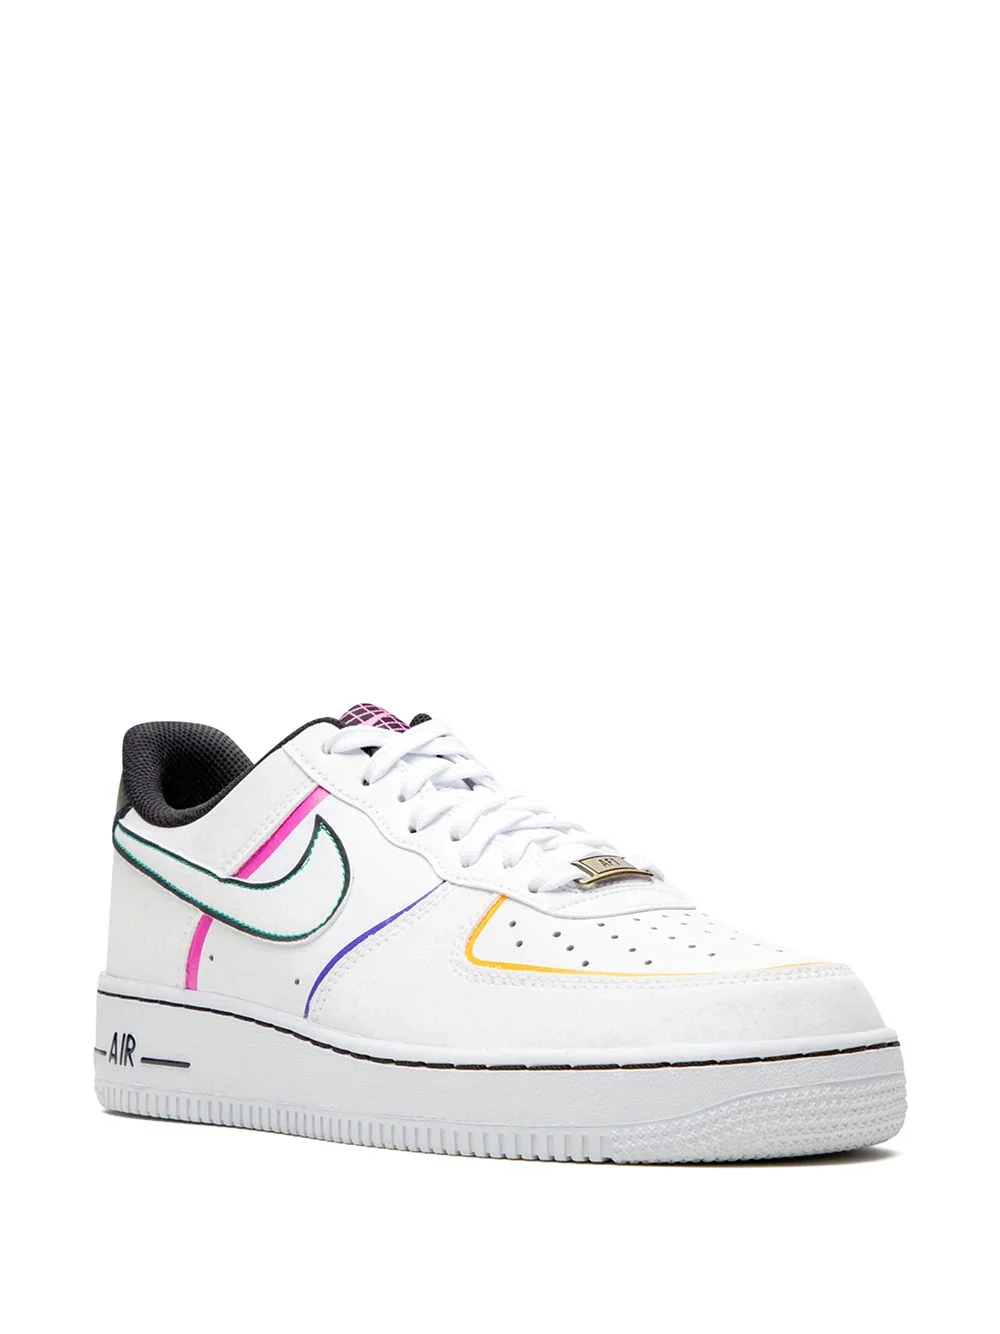 Nike Air Force 1 Low Day of the Dead (2019) фотография